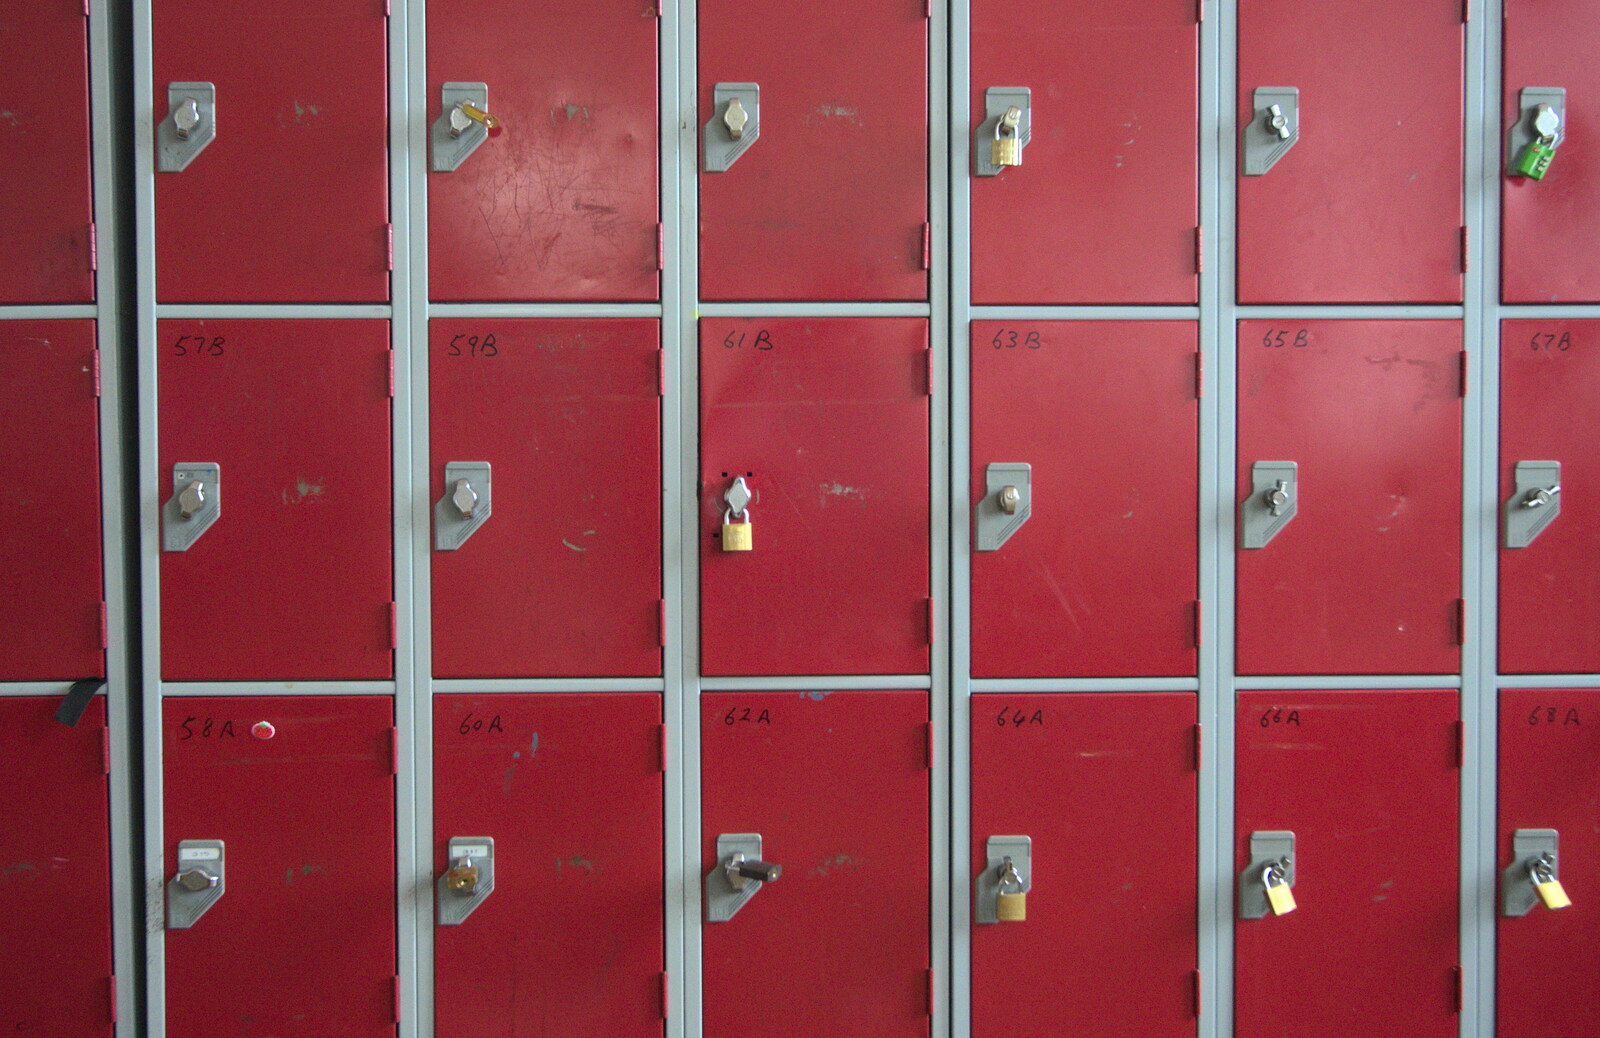 A wall of lockers from Sion Hill and Blackrock for the Day, Dublin, Ireland - 17th September 2016